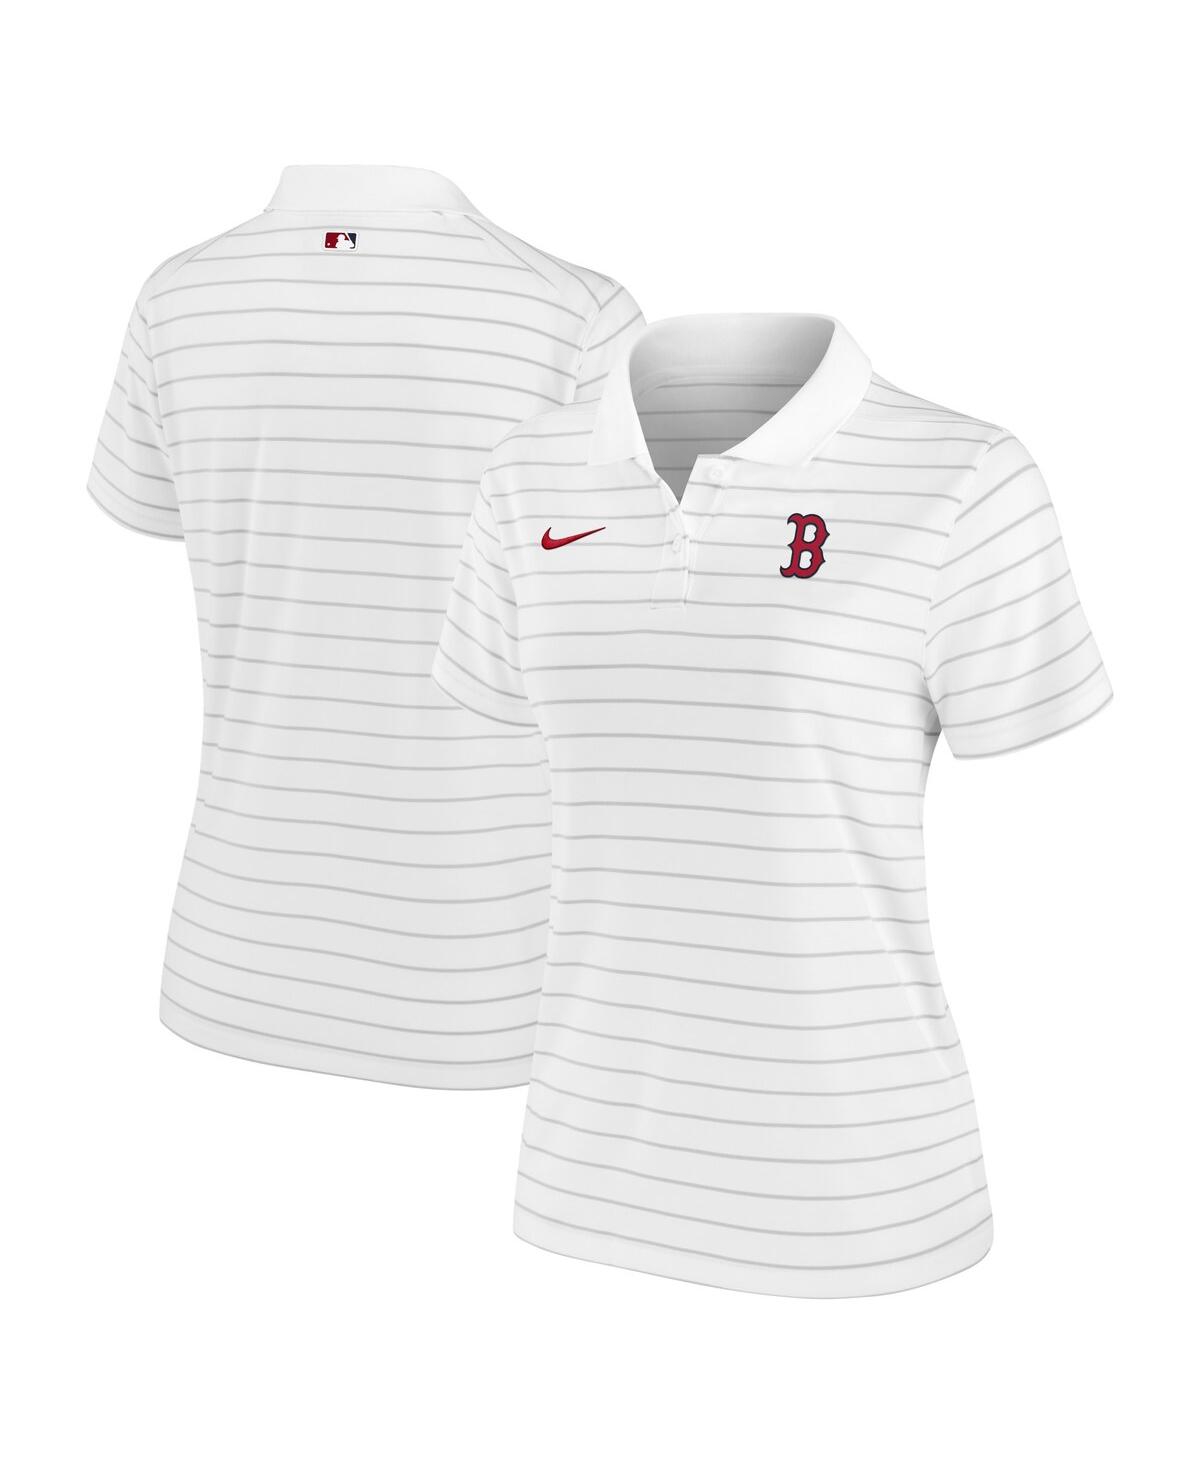 Women's Nike White Boston Red Sox Authentic Collection Victory Performance Polo Shirt - White